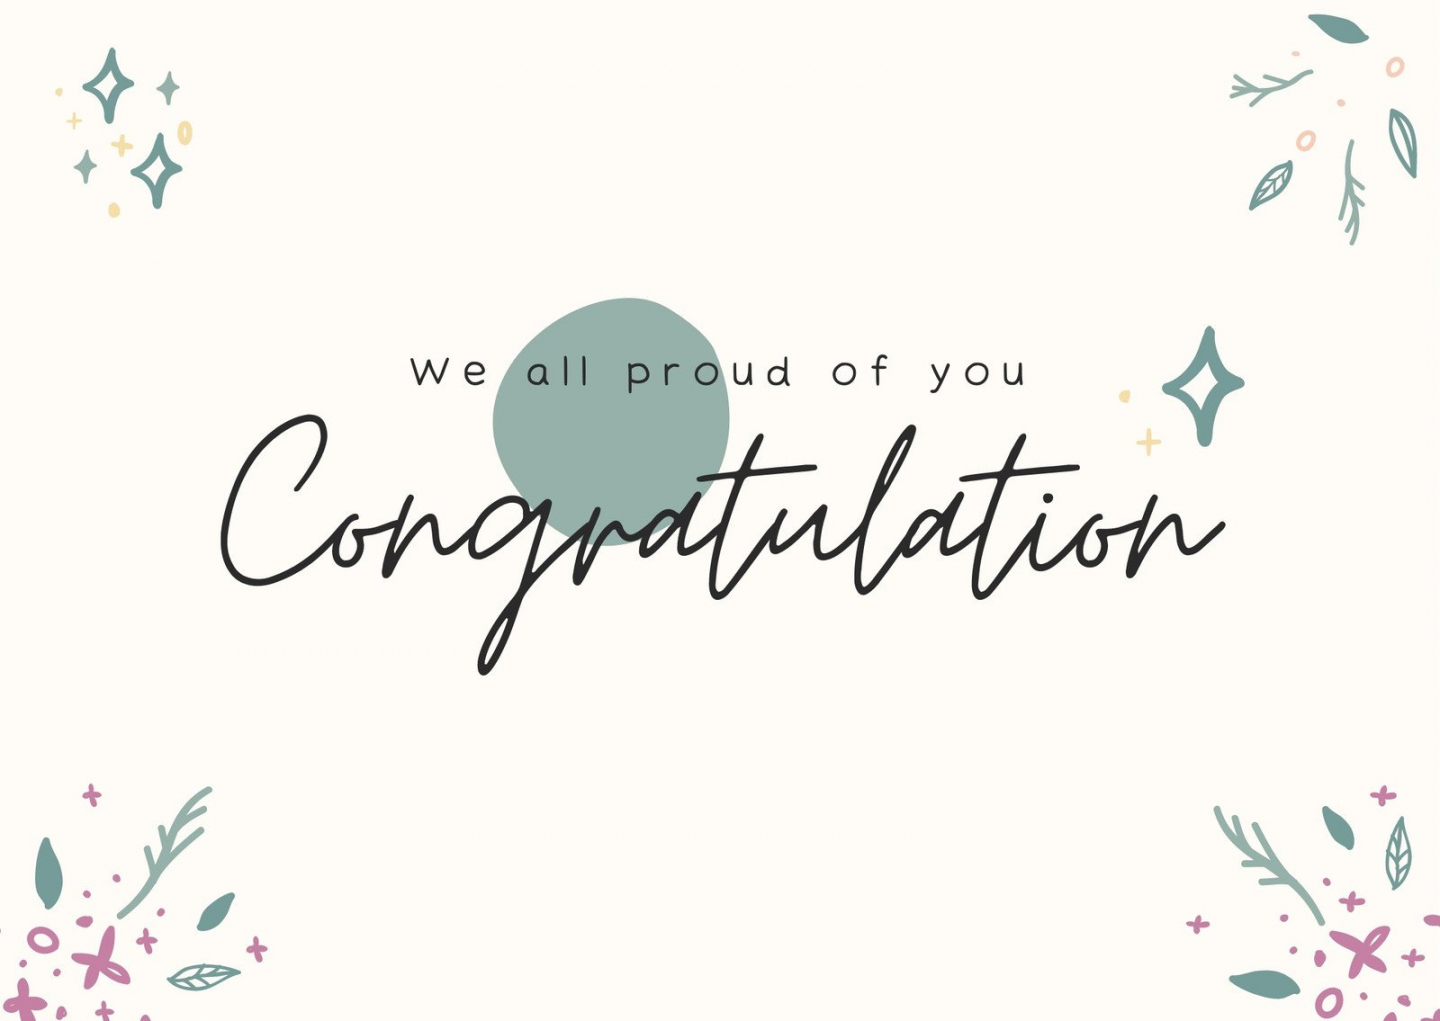 Free and customizable congratulations templates - FREE Printables - Congratulations Cards Printable Free